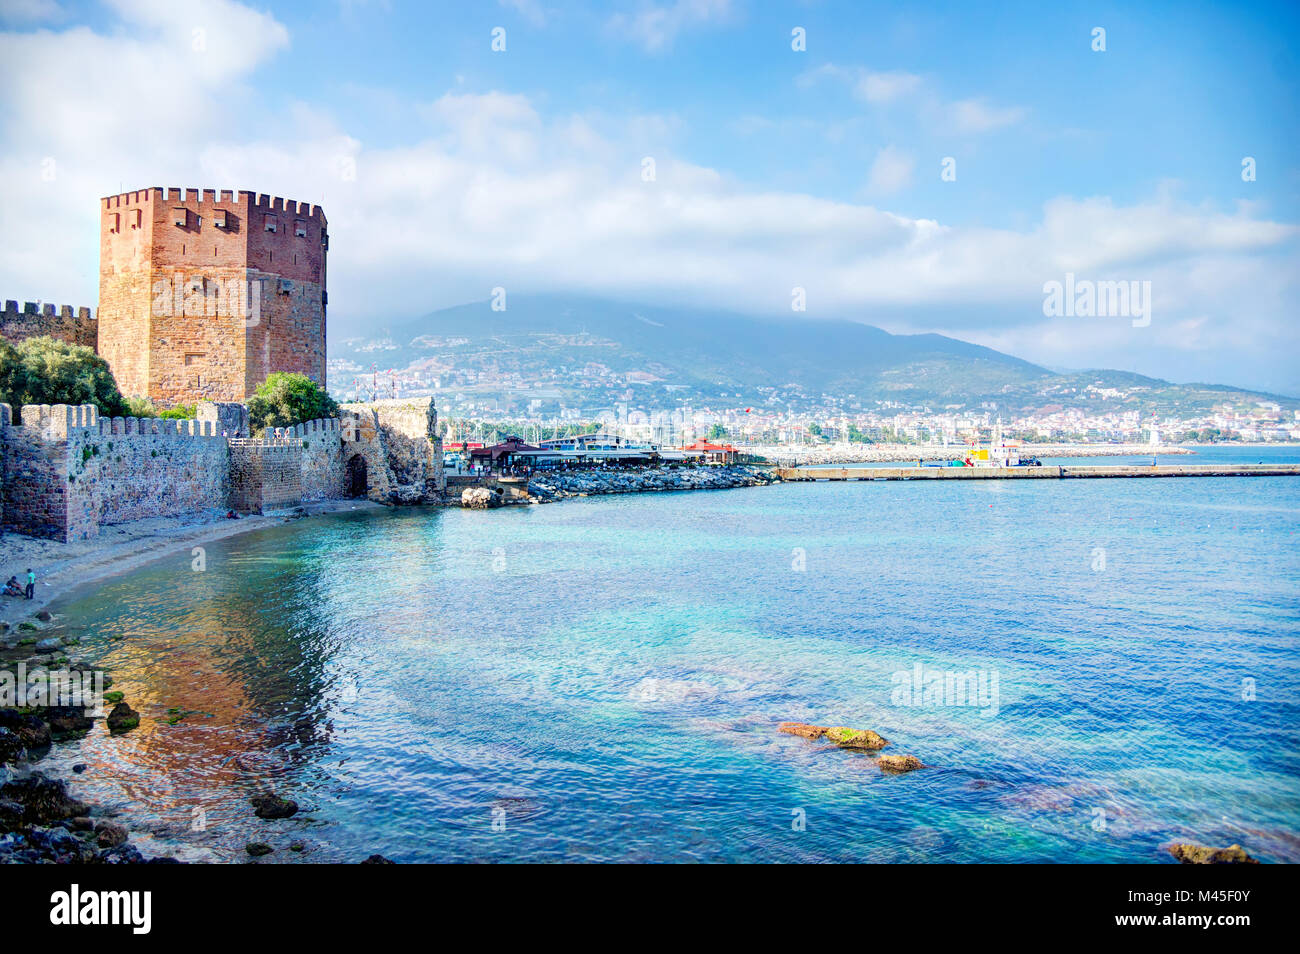 Kizil Kule - Ancient Red Tower in Alanya, Turkey Stock Photo